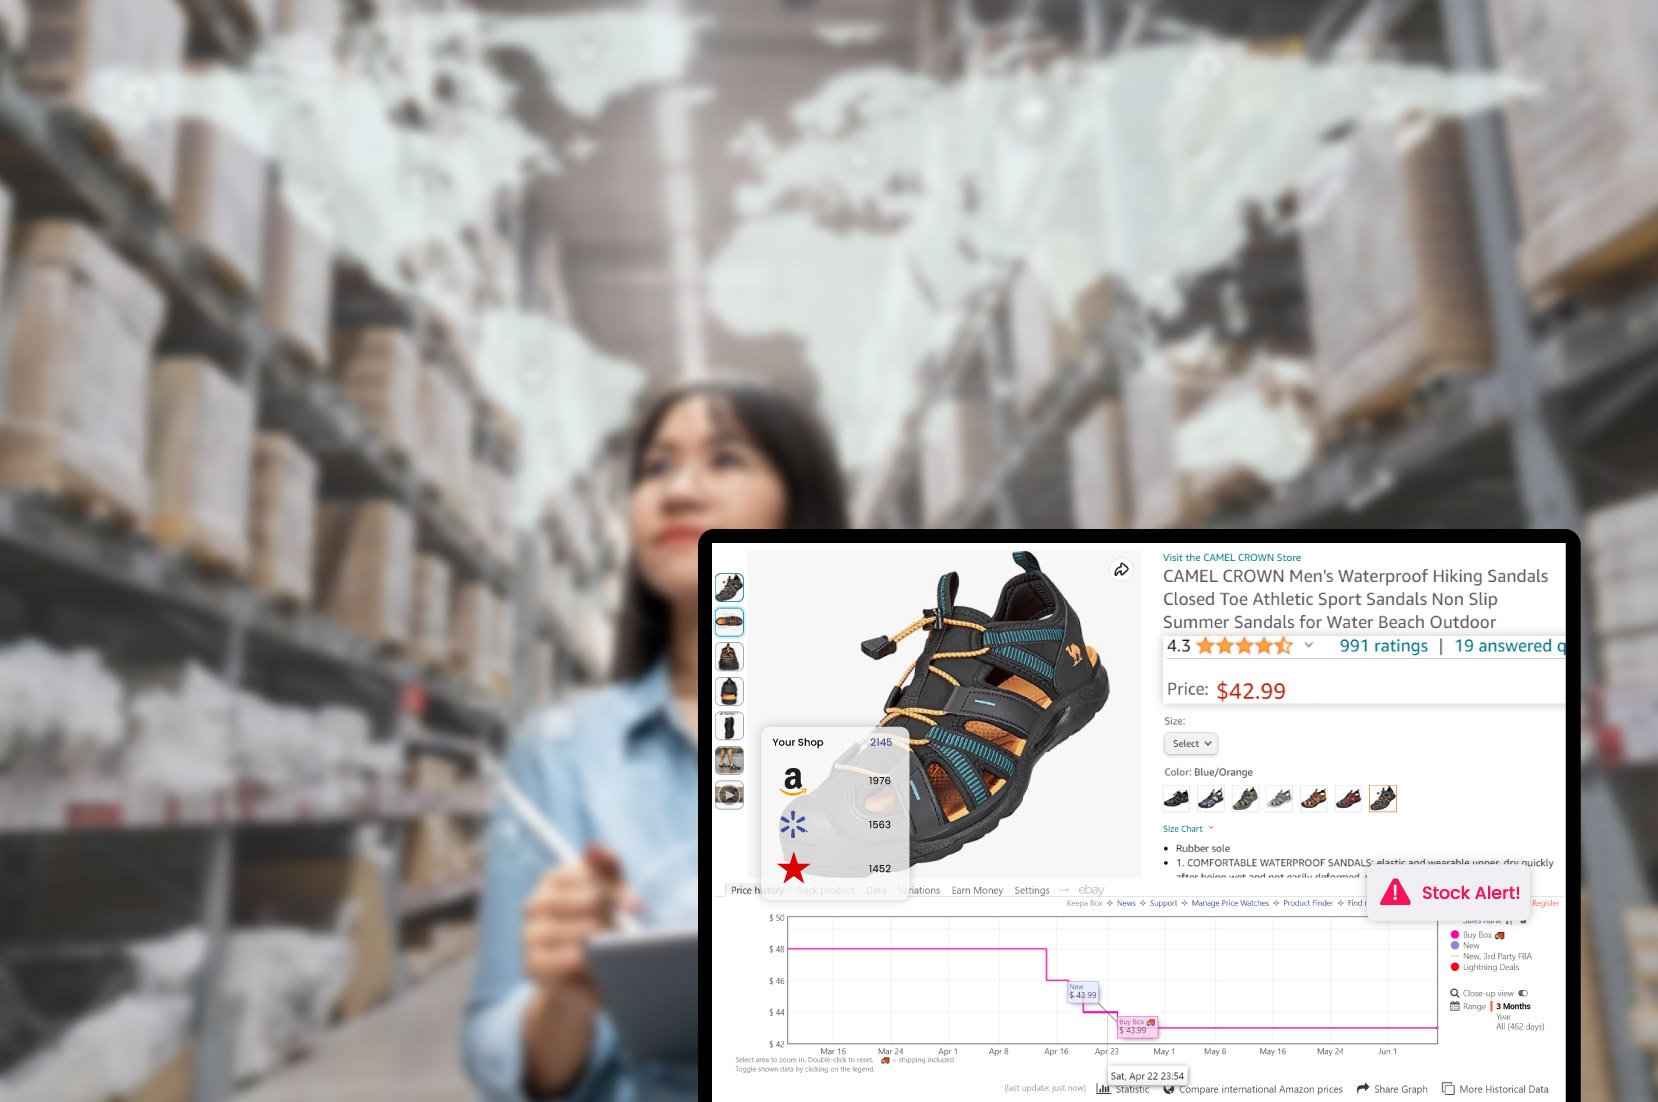 Seize-Control-of-Your-Retail-Segment-with-AI-Powered-Insights